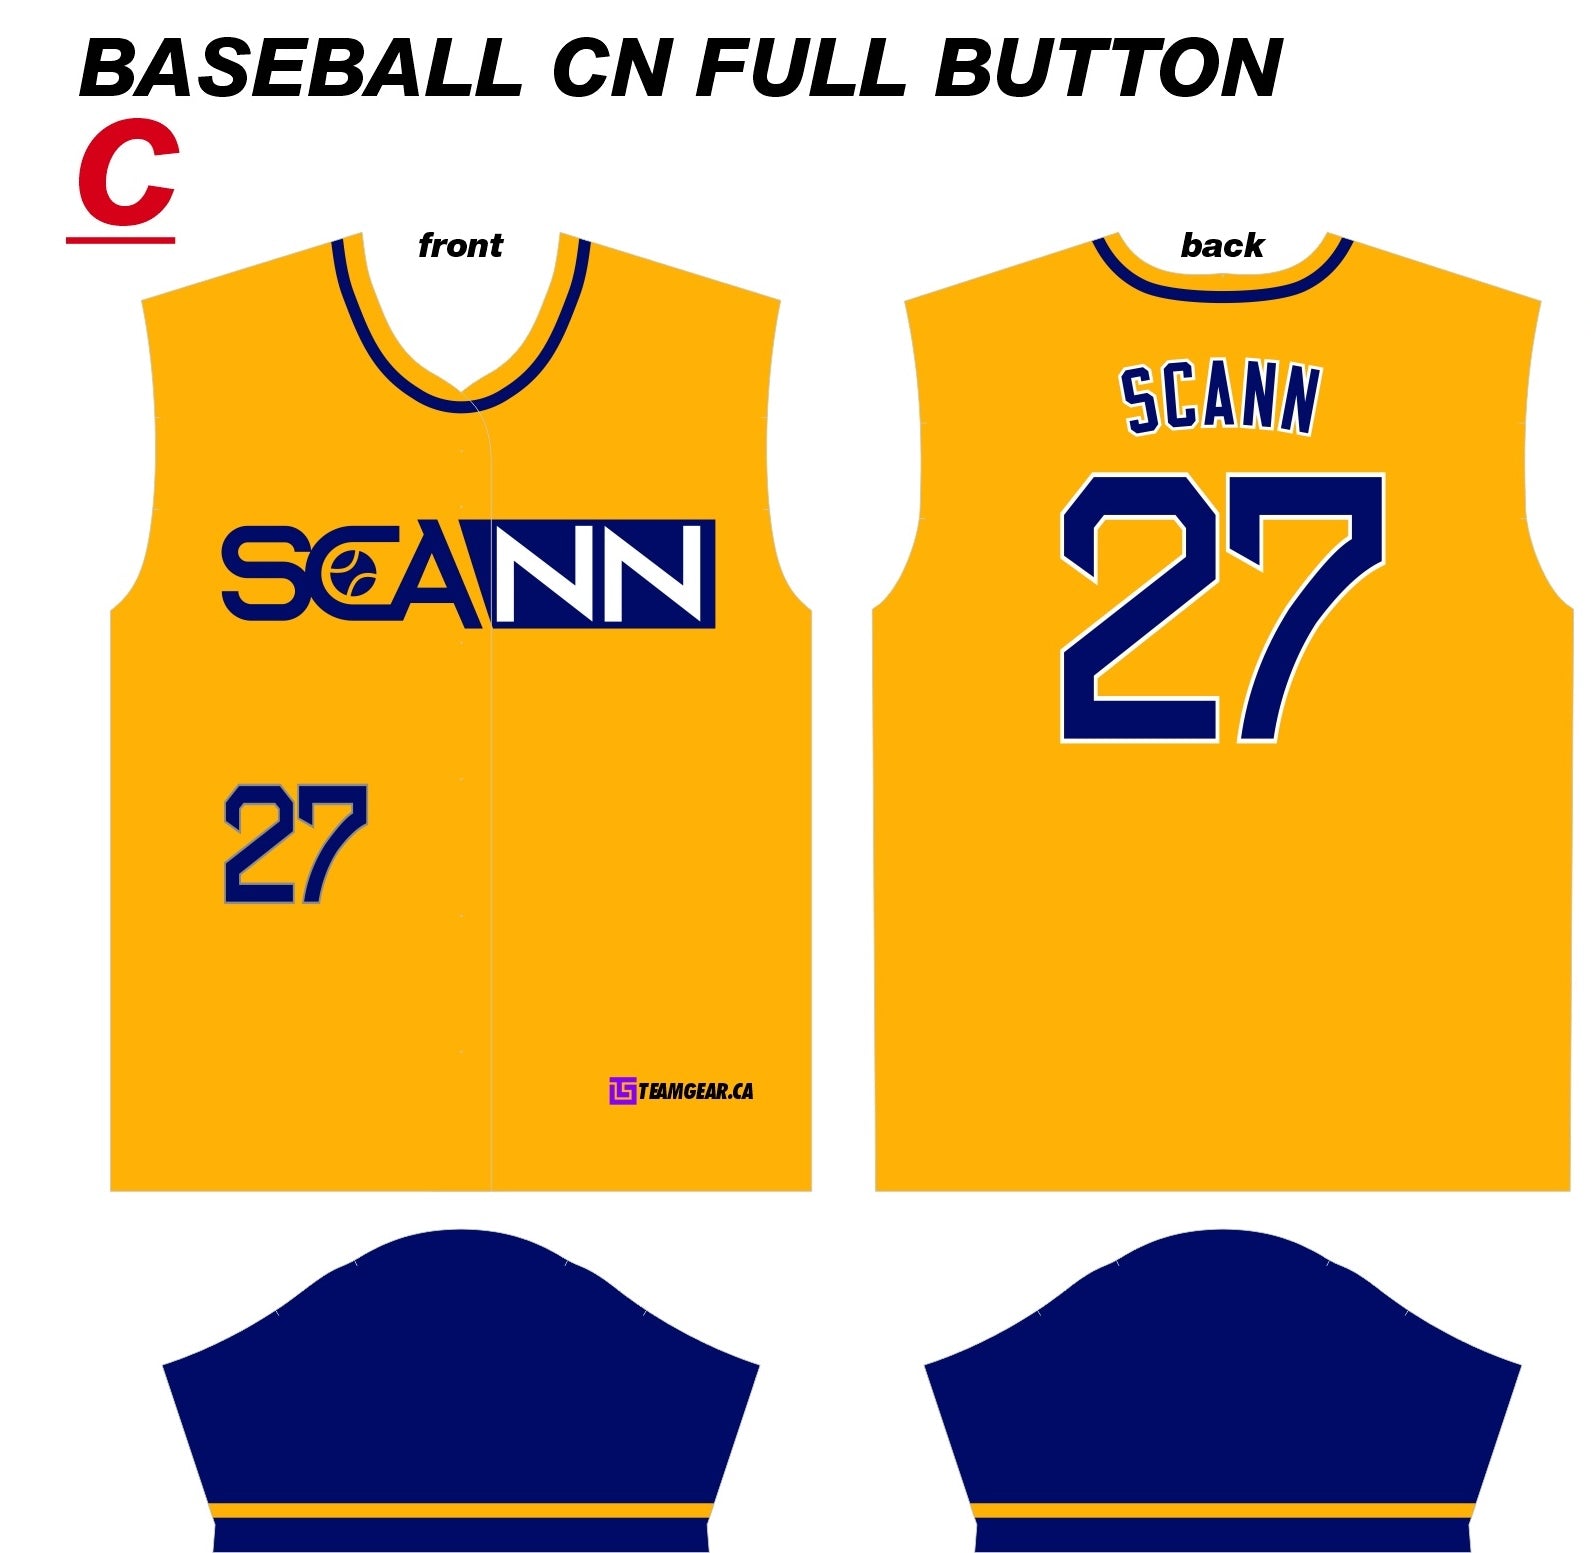 custom full button jersey design for ShowZone creator Scann in yellow and navy blue